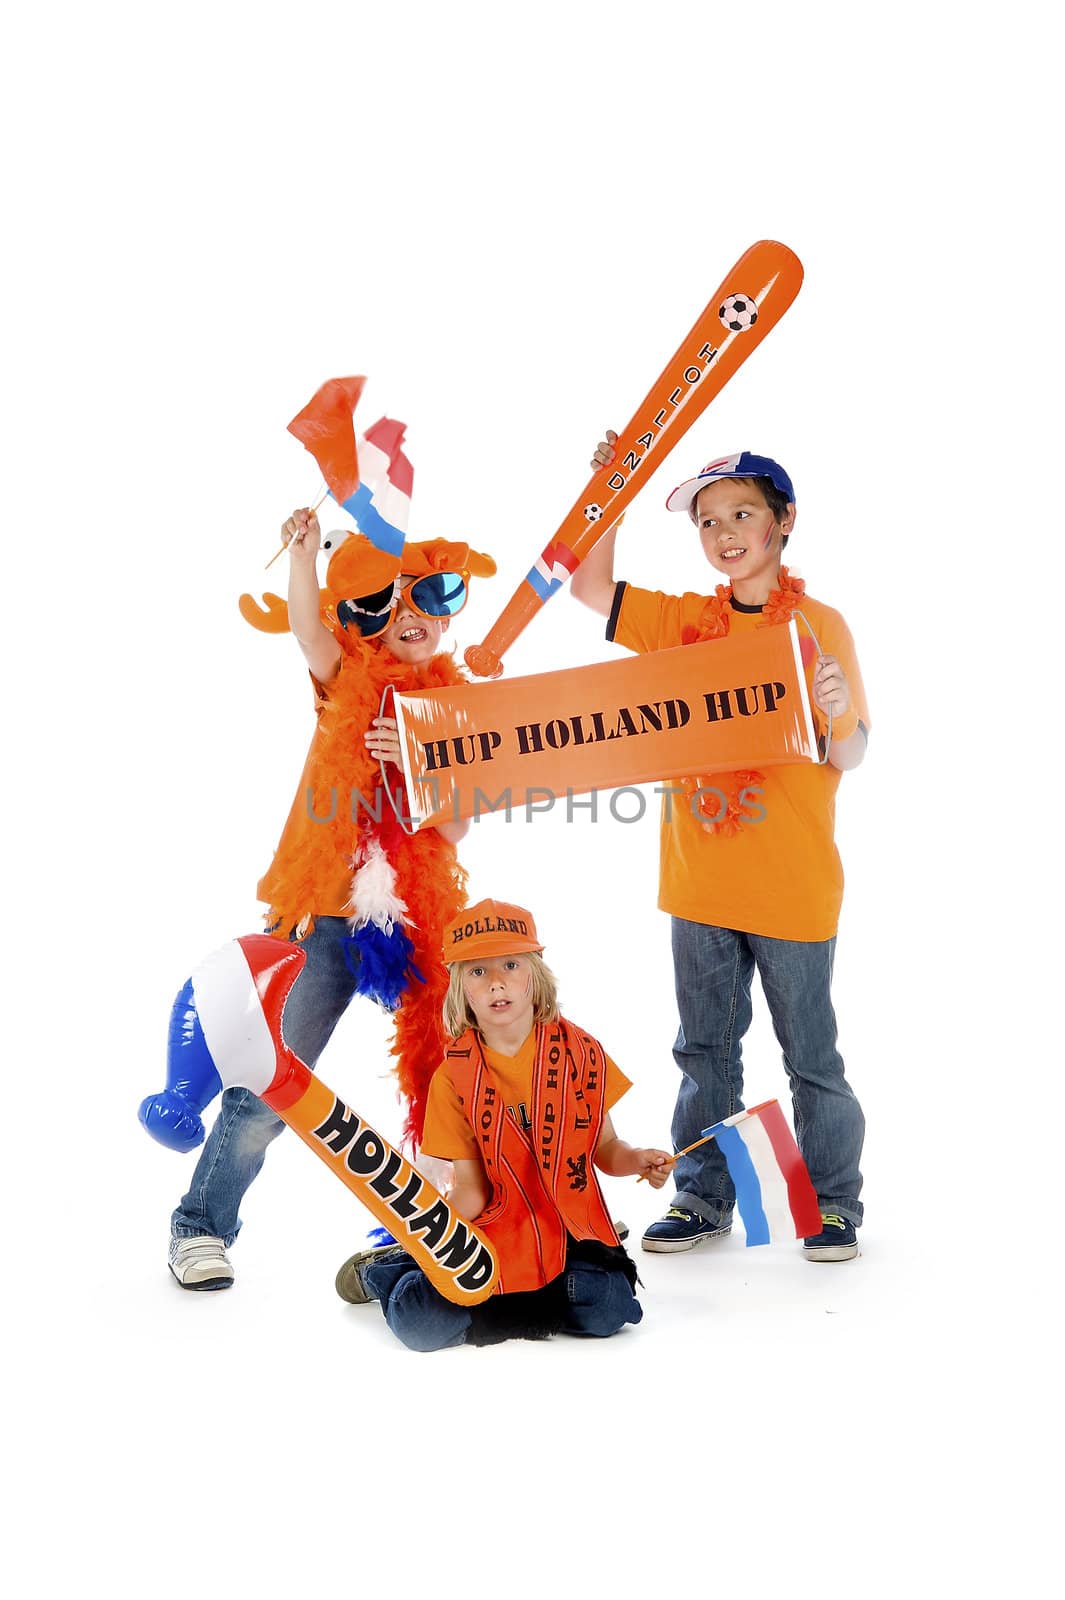 three supporters from the dutch football team